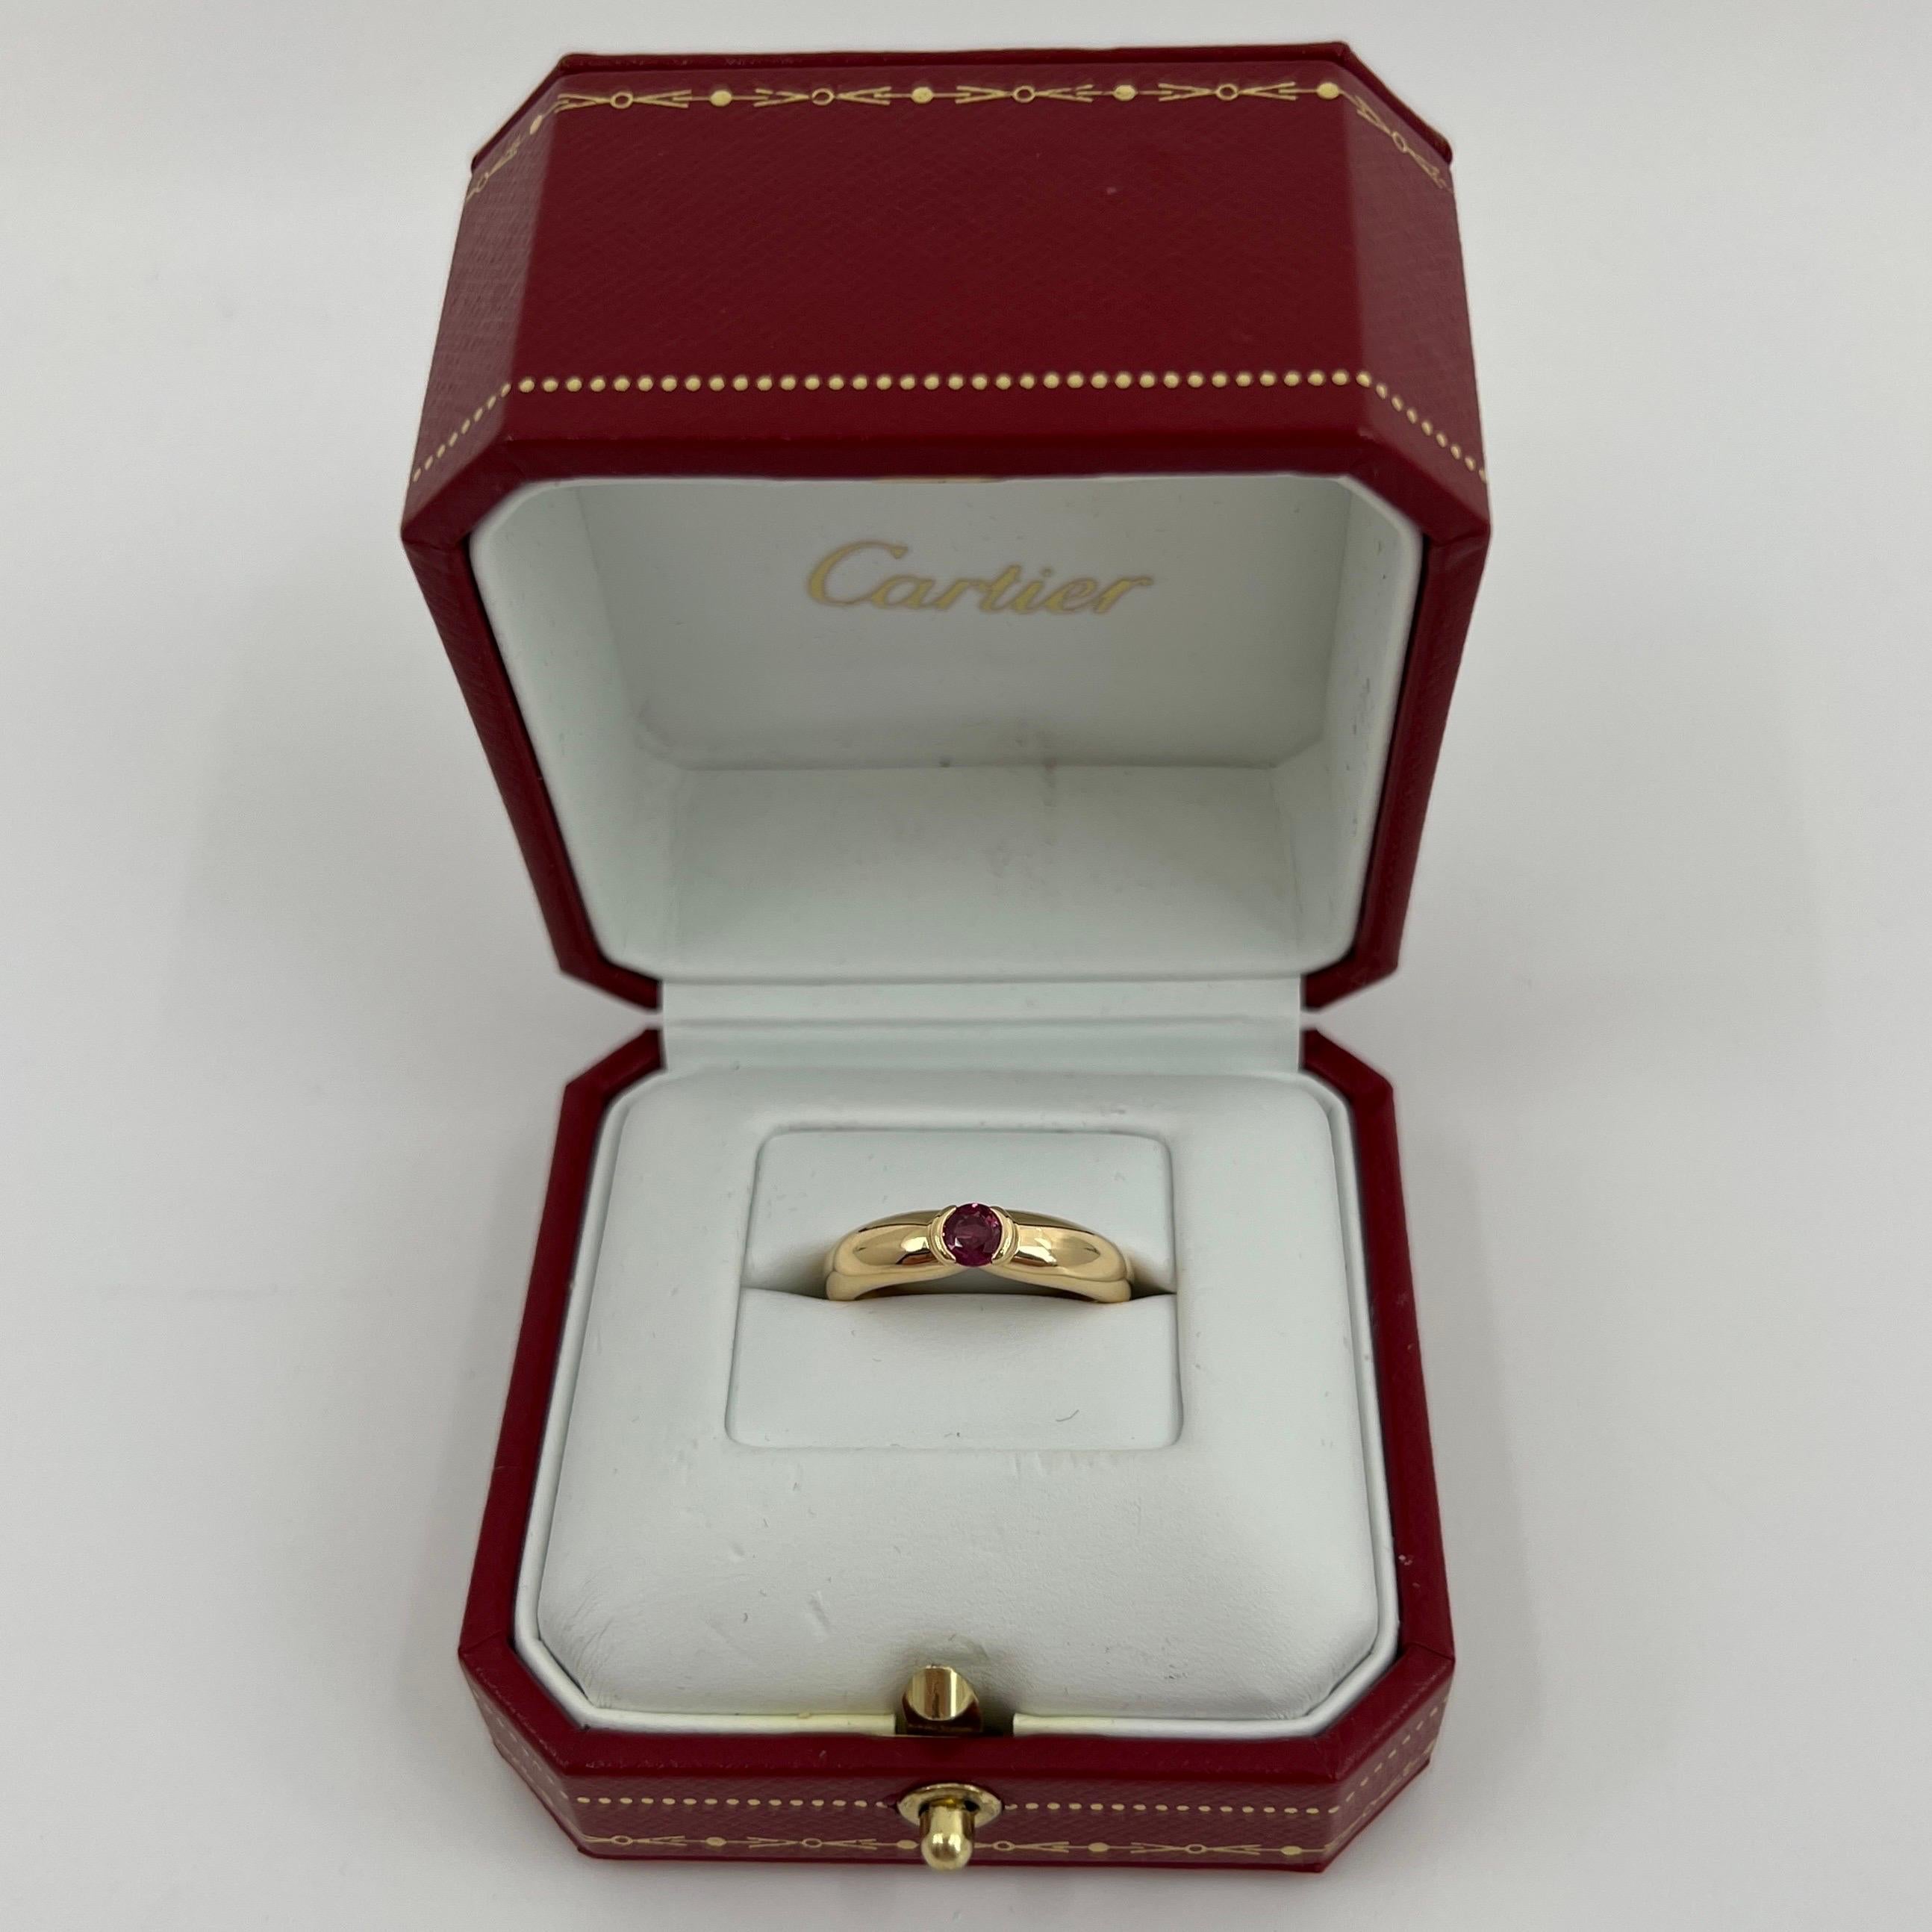 Vintage Cartier Vivid Red Ruby 18k Yellow Gold Solitaire Ring.

Stunning yellow gold ring set with a fine vivid pink red ruby. Fine jewellery houses like Cartier only use the finest of gemstones and this ruby is no exception. An excellent quality